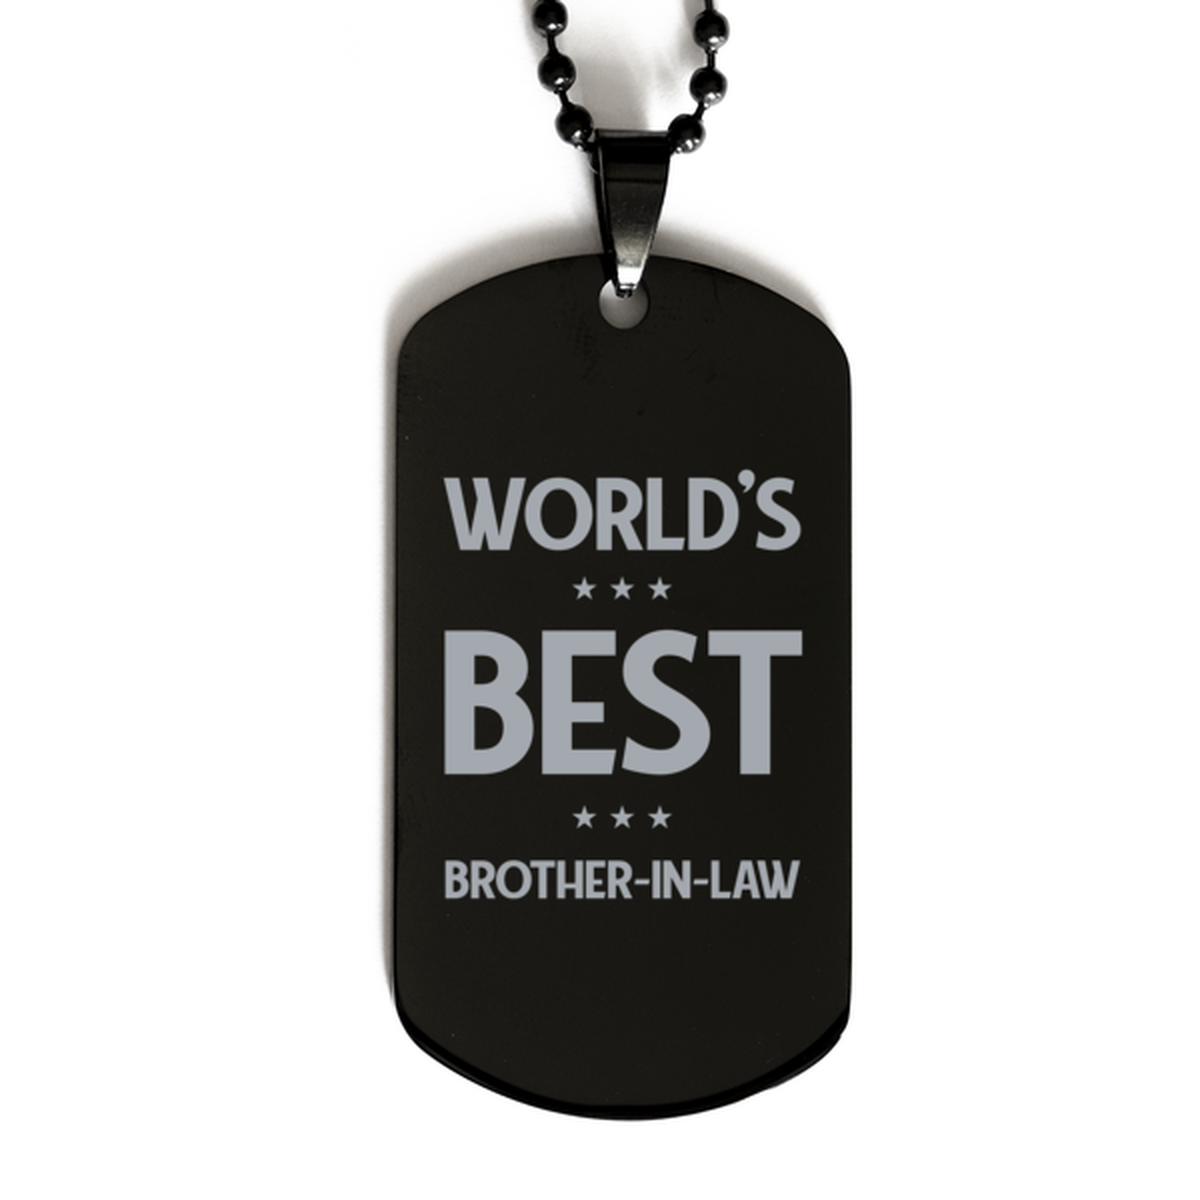 Worlds Best Brother-in-law Gifts, Funny Black Engraved Dog Tag For Brother-in-law, Birthday Presents For Men